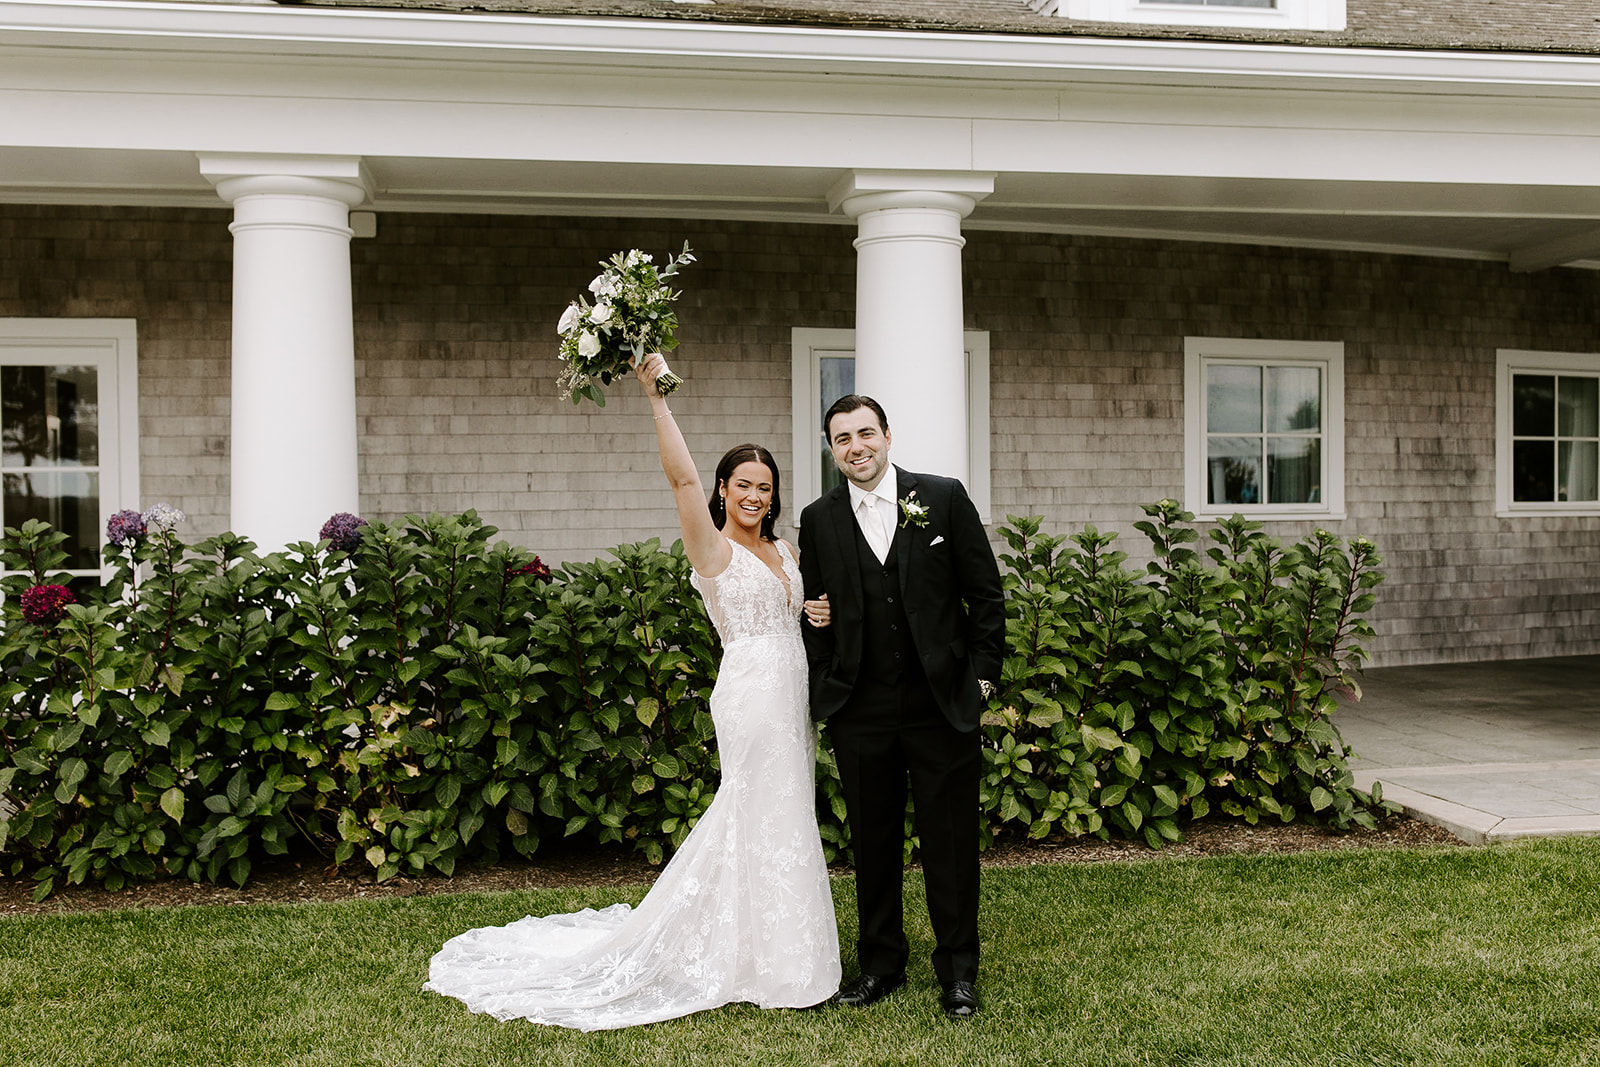 Stunning bride and groom pose in front of their dreamy wedding venue together